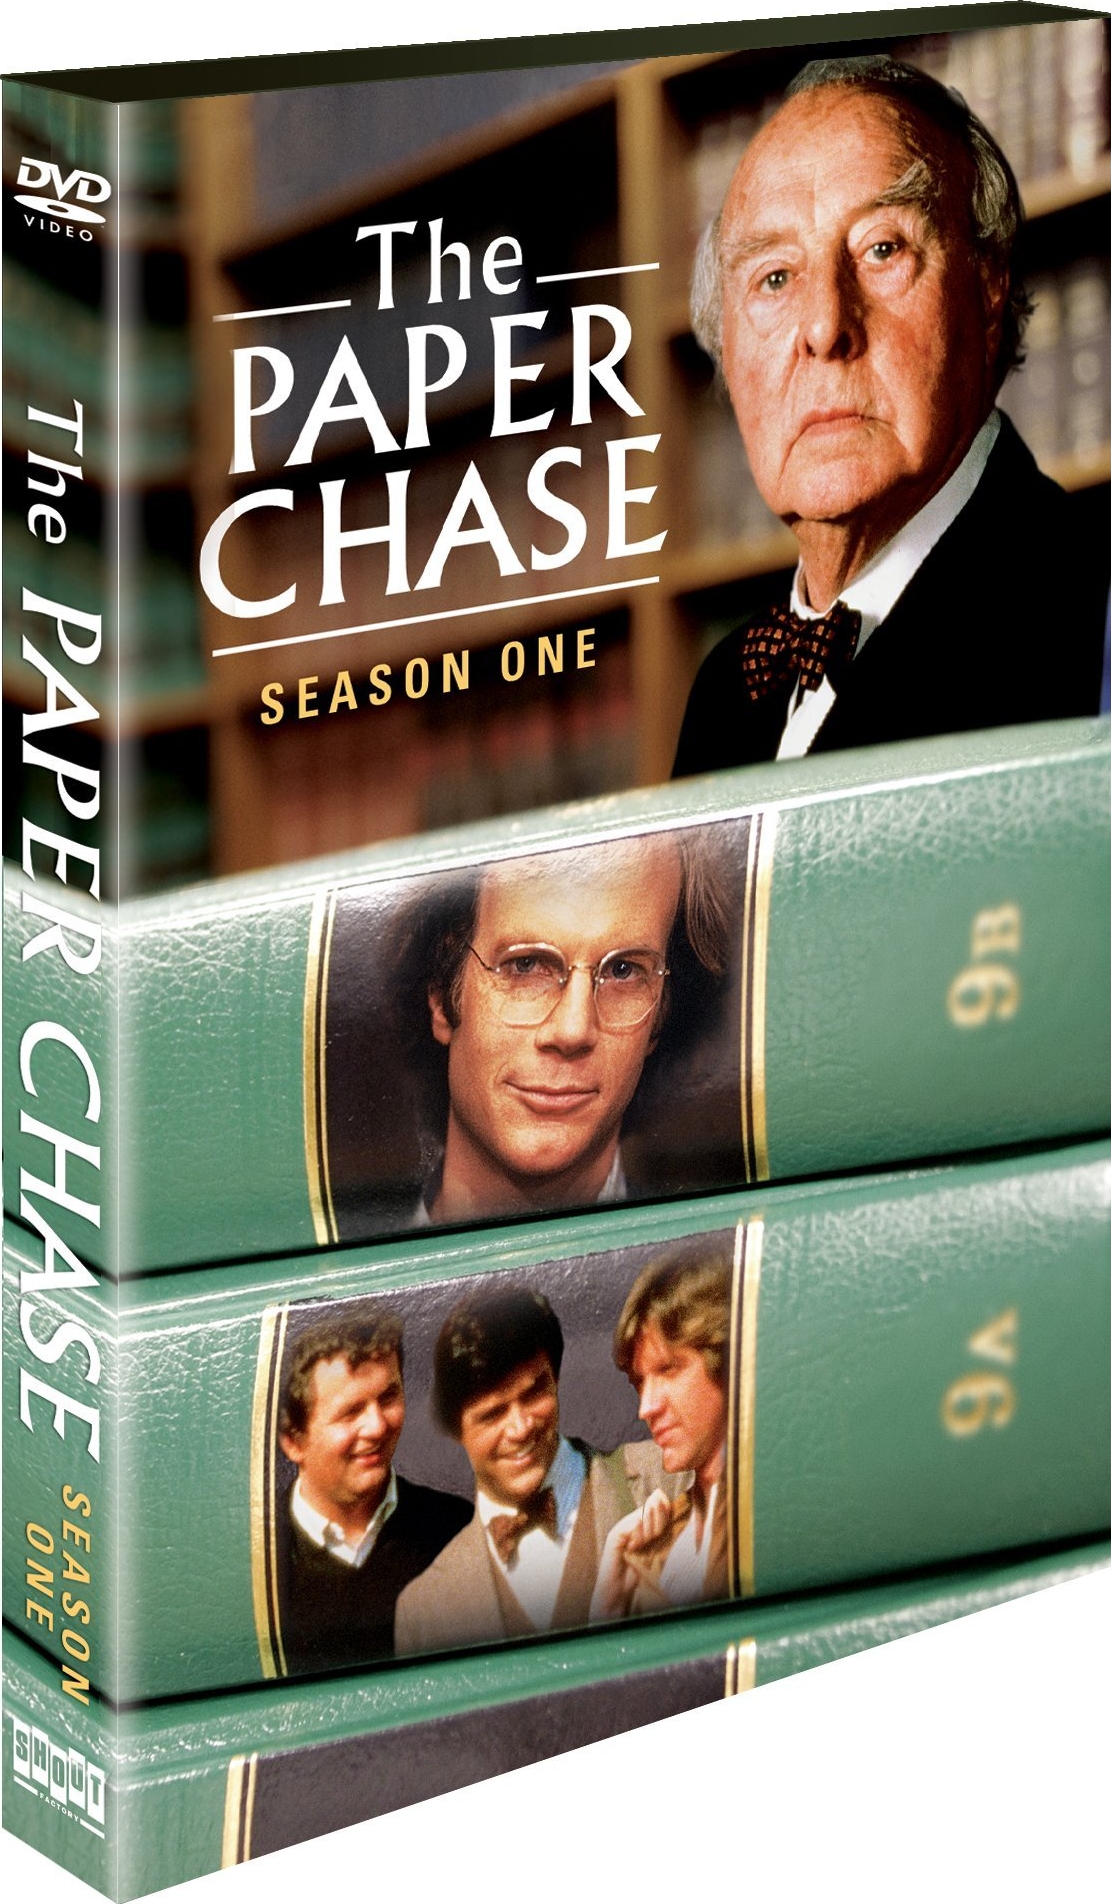 The Paper Chase: Season One DVD